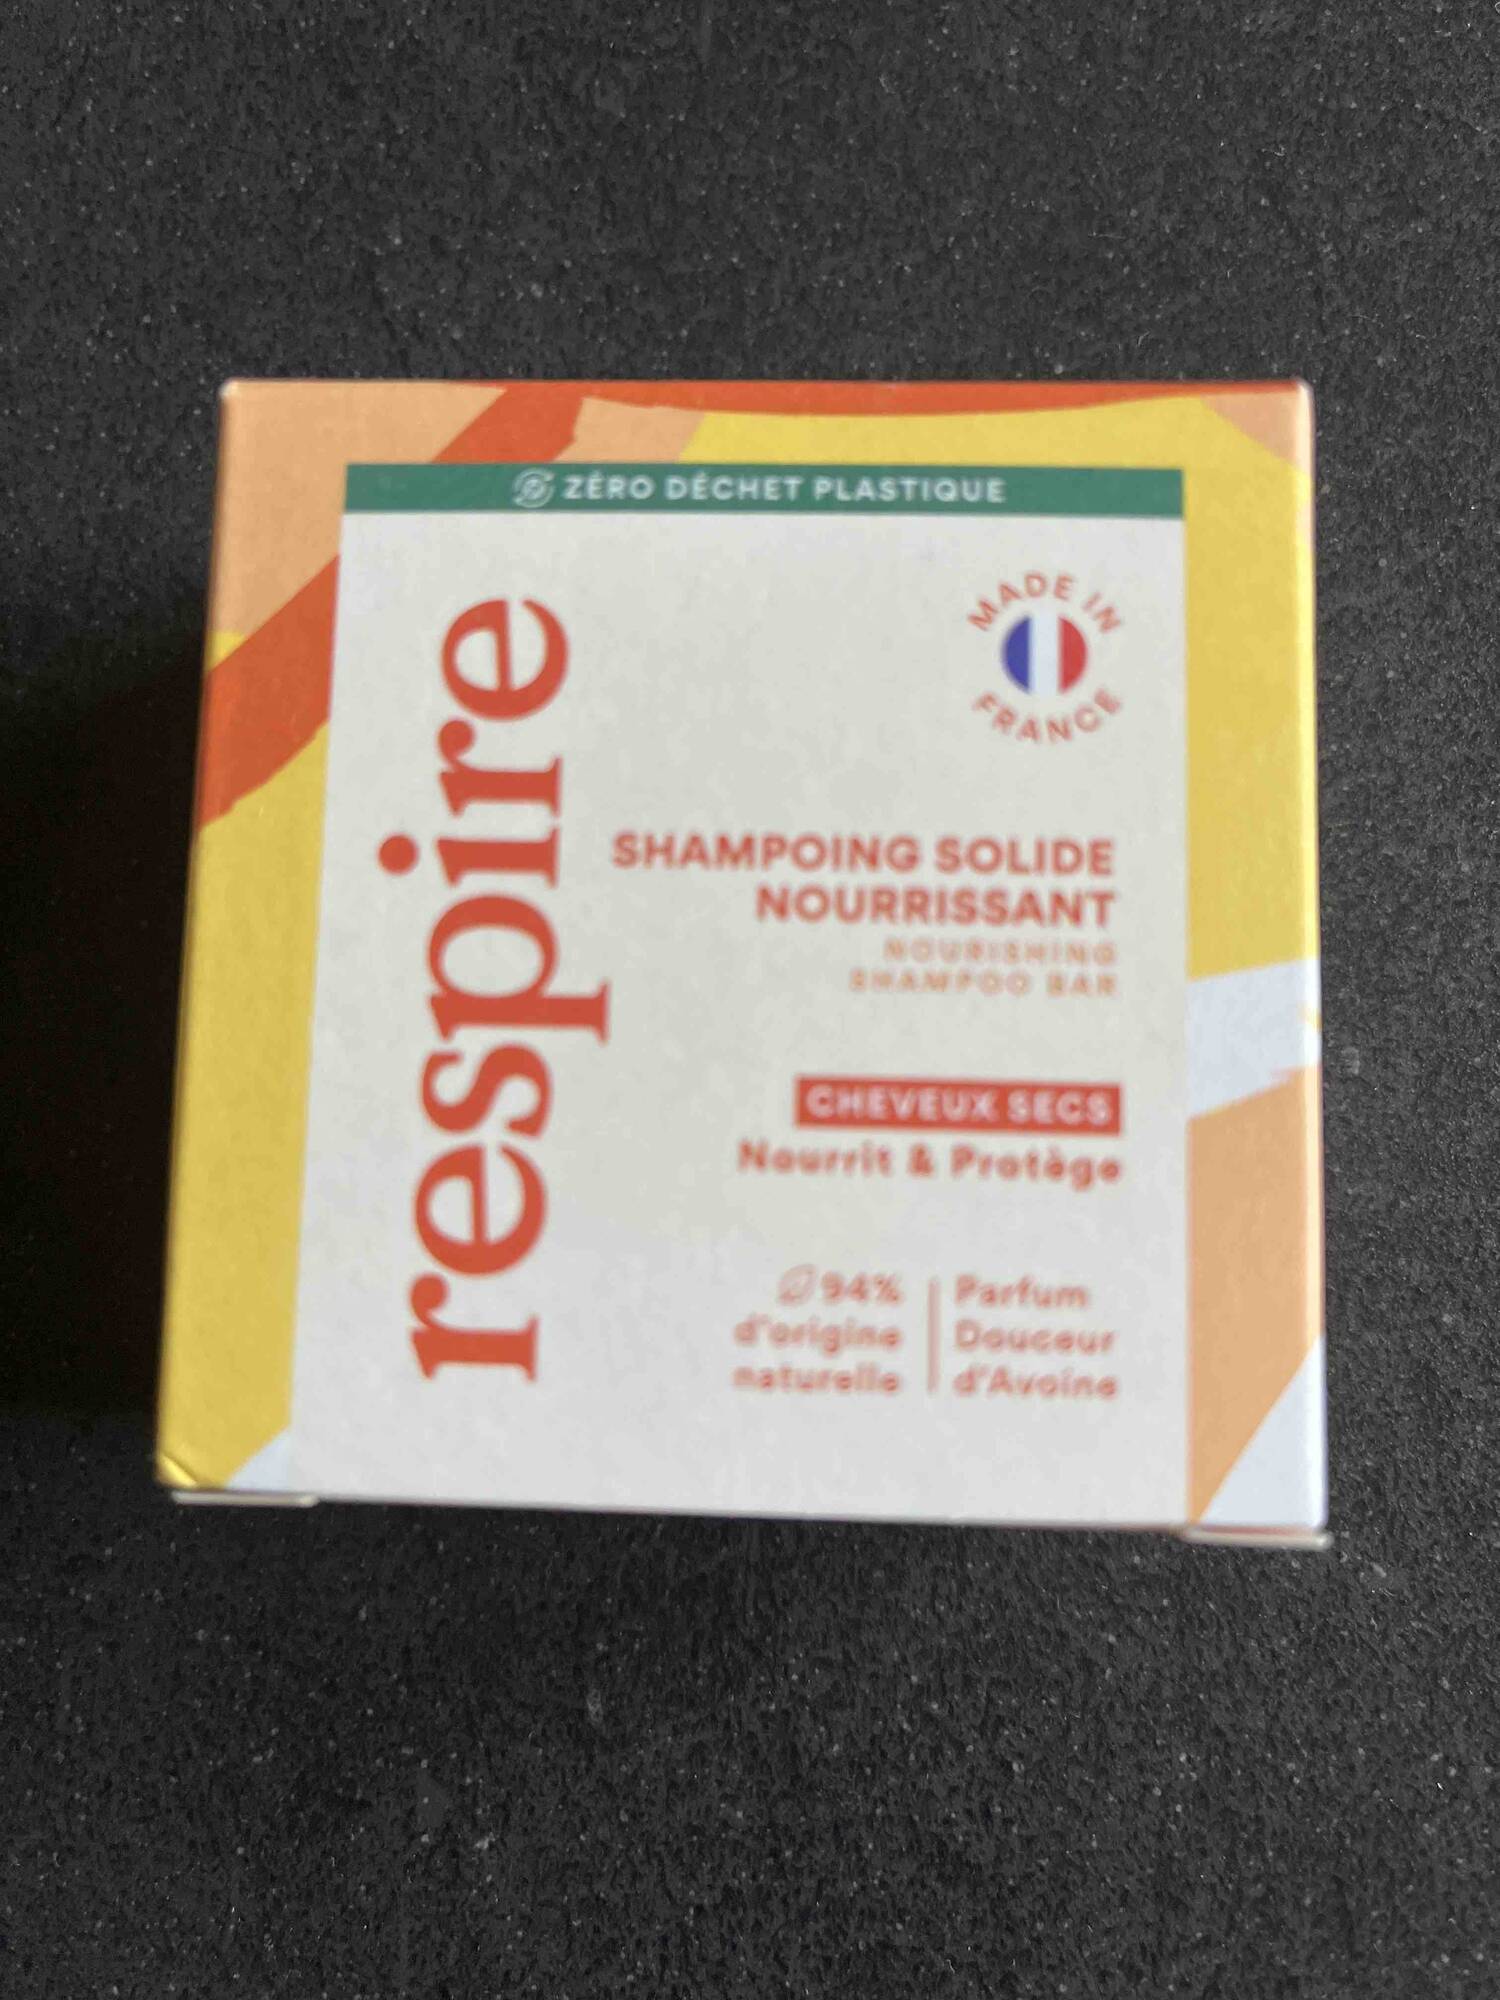 RESPIRE - Shampoing solide nourrissant